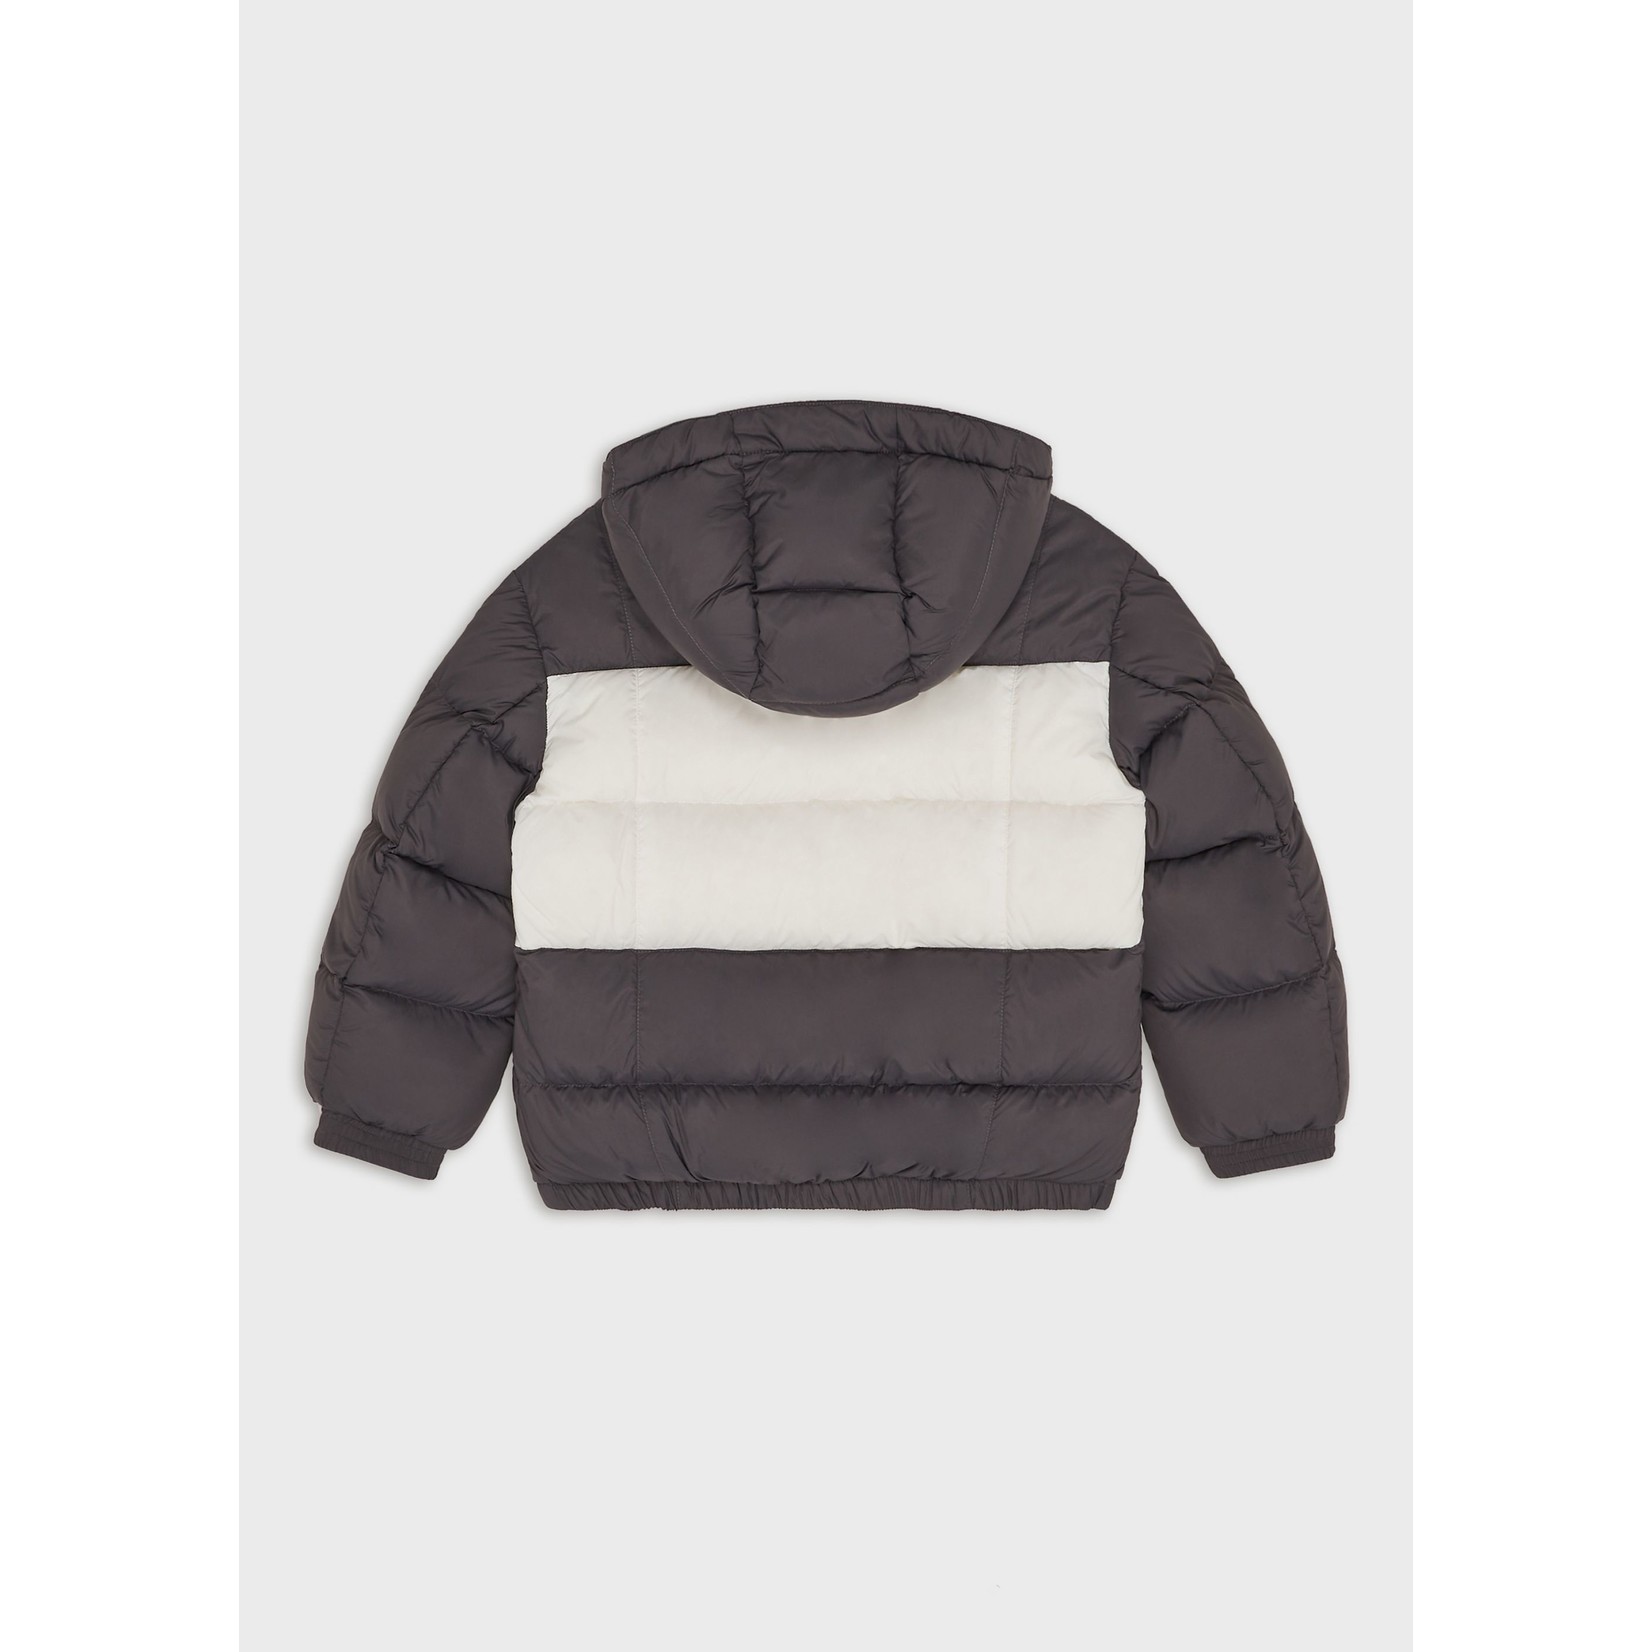 Emporio Armani Emporio Armani - Hooded, quilted-nylon puffer jacket with recycled down